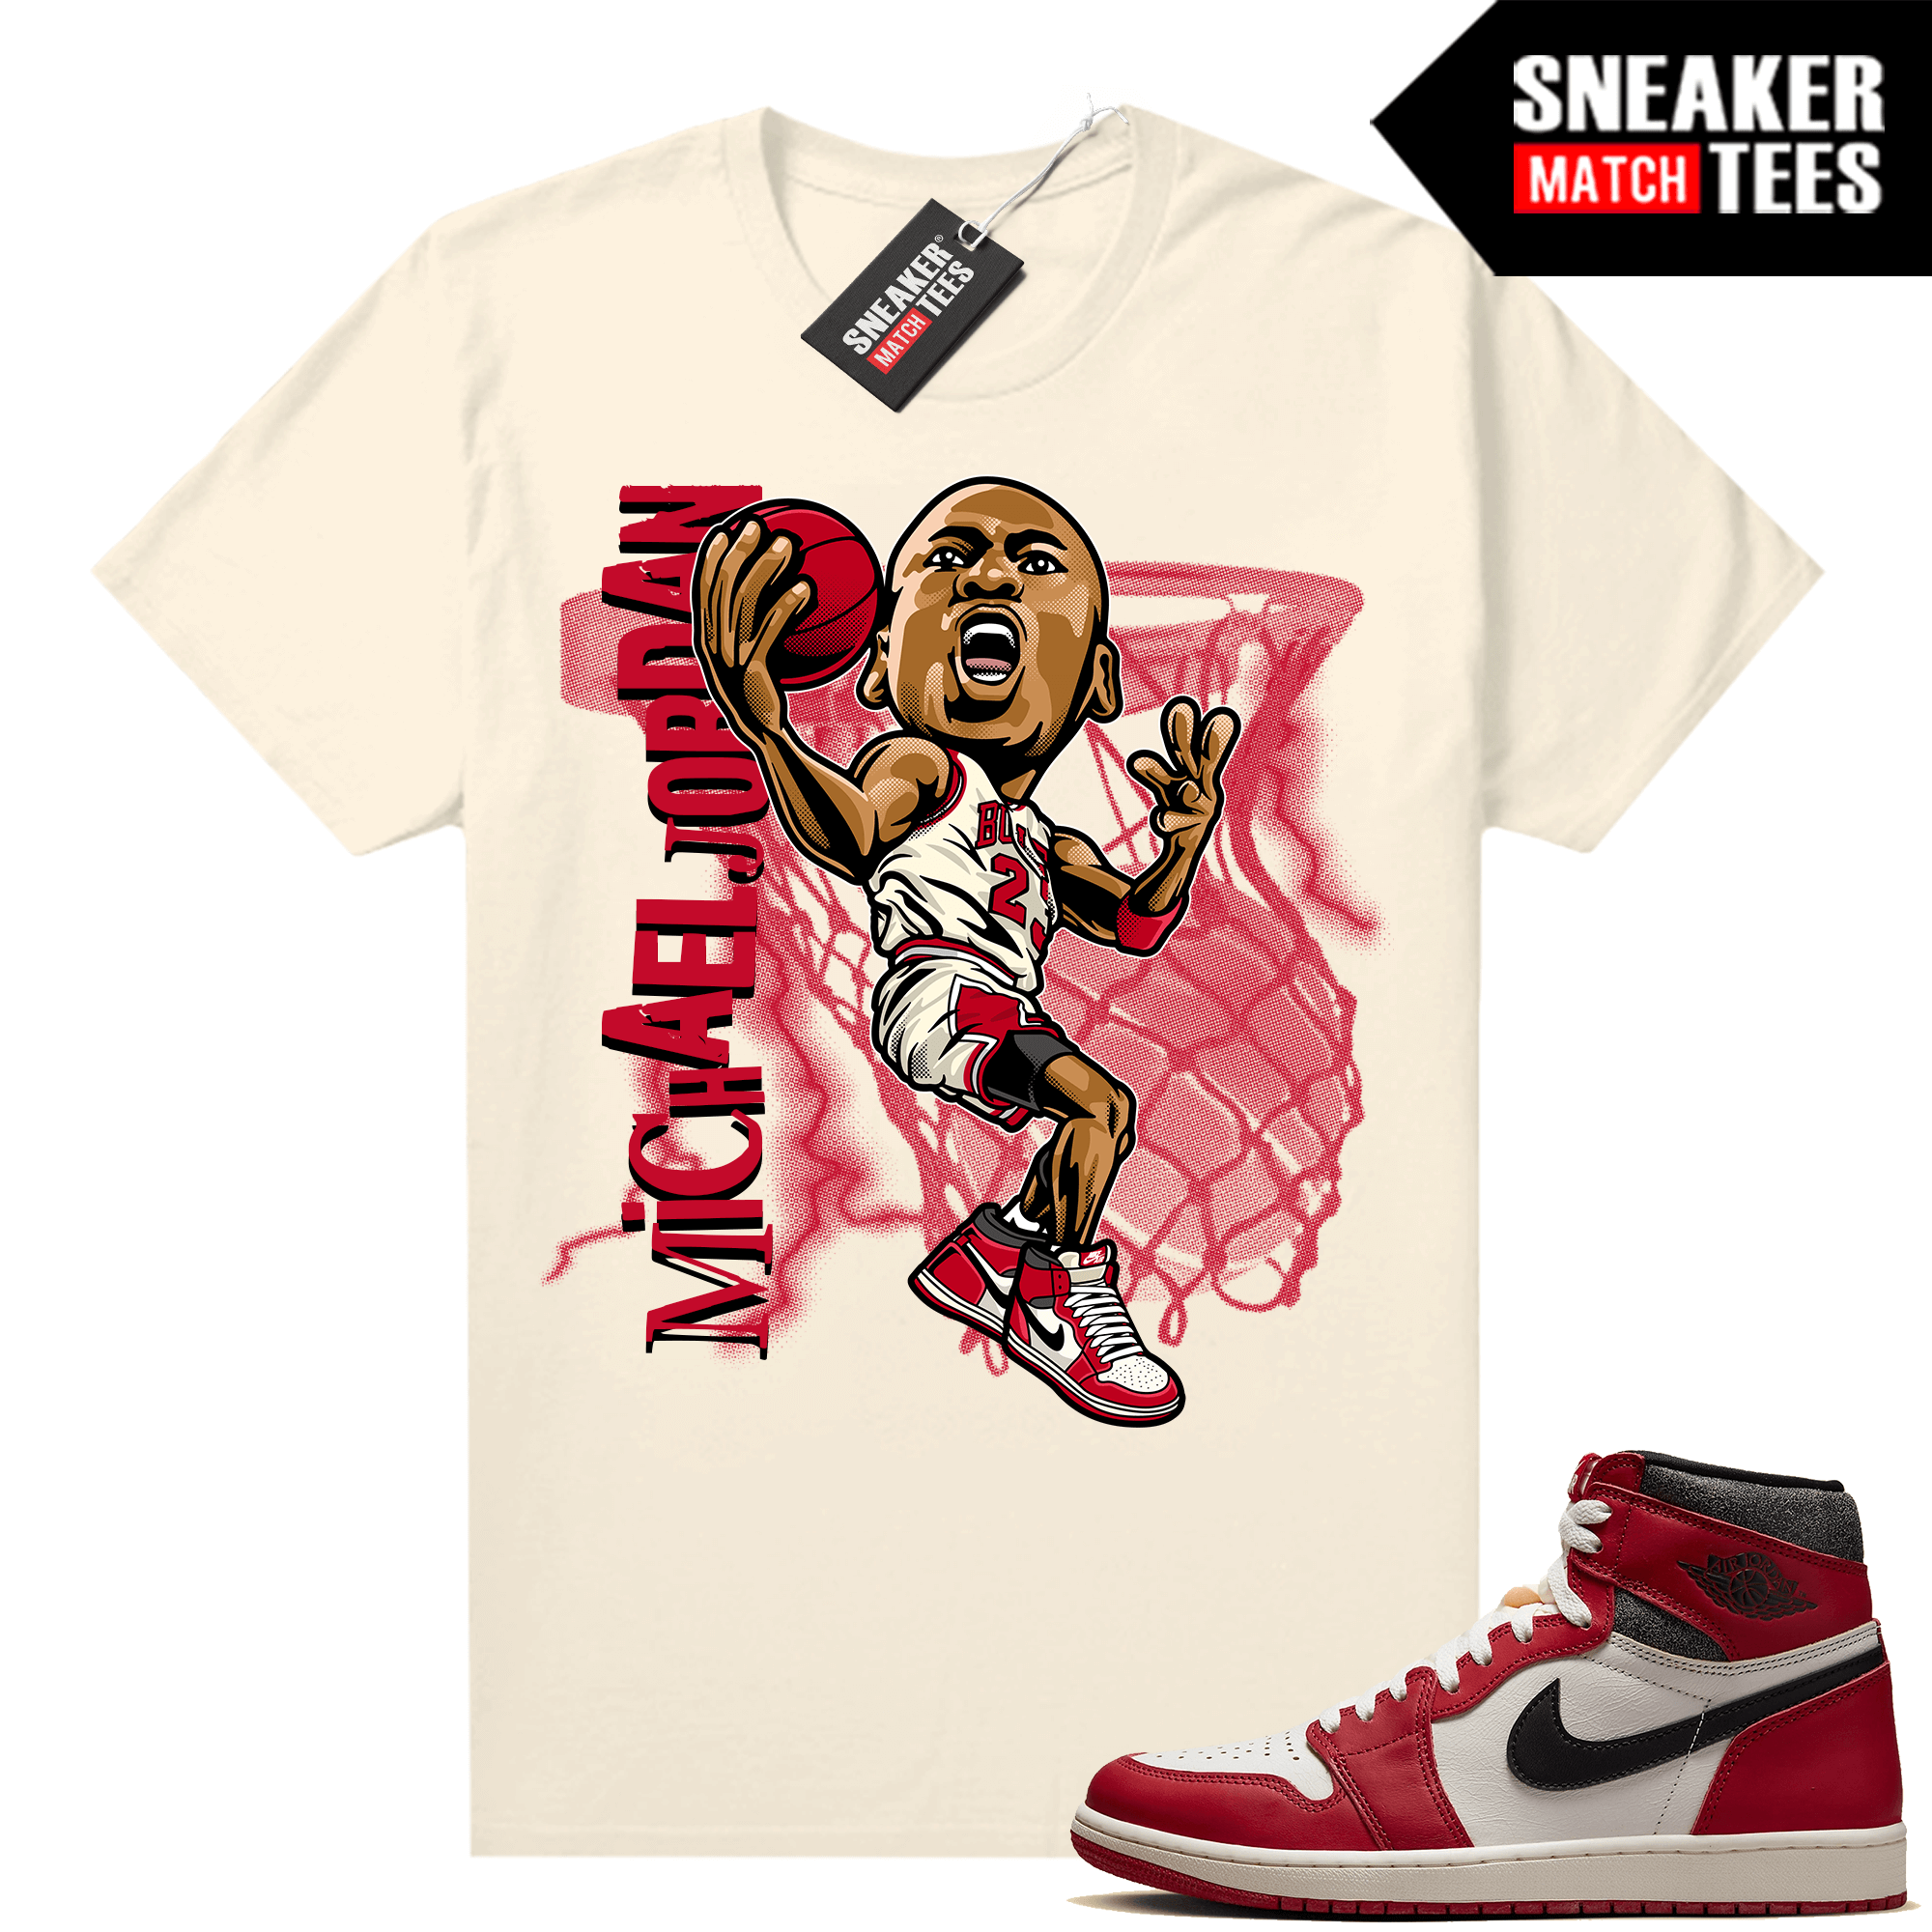 Chicago 1s Lost and Found Ariss-eu Sneaker Match Shirt MJ Showtime